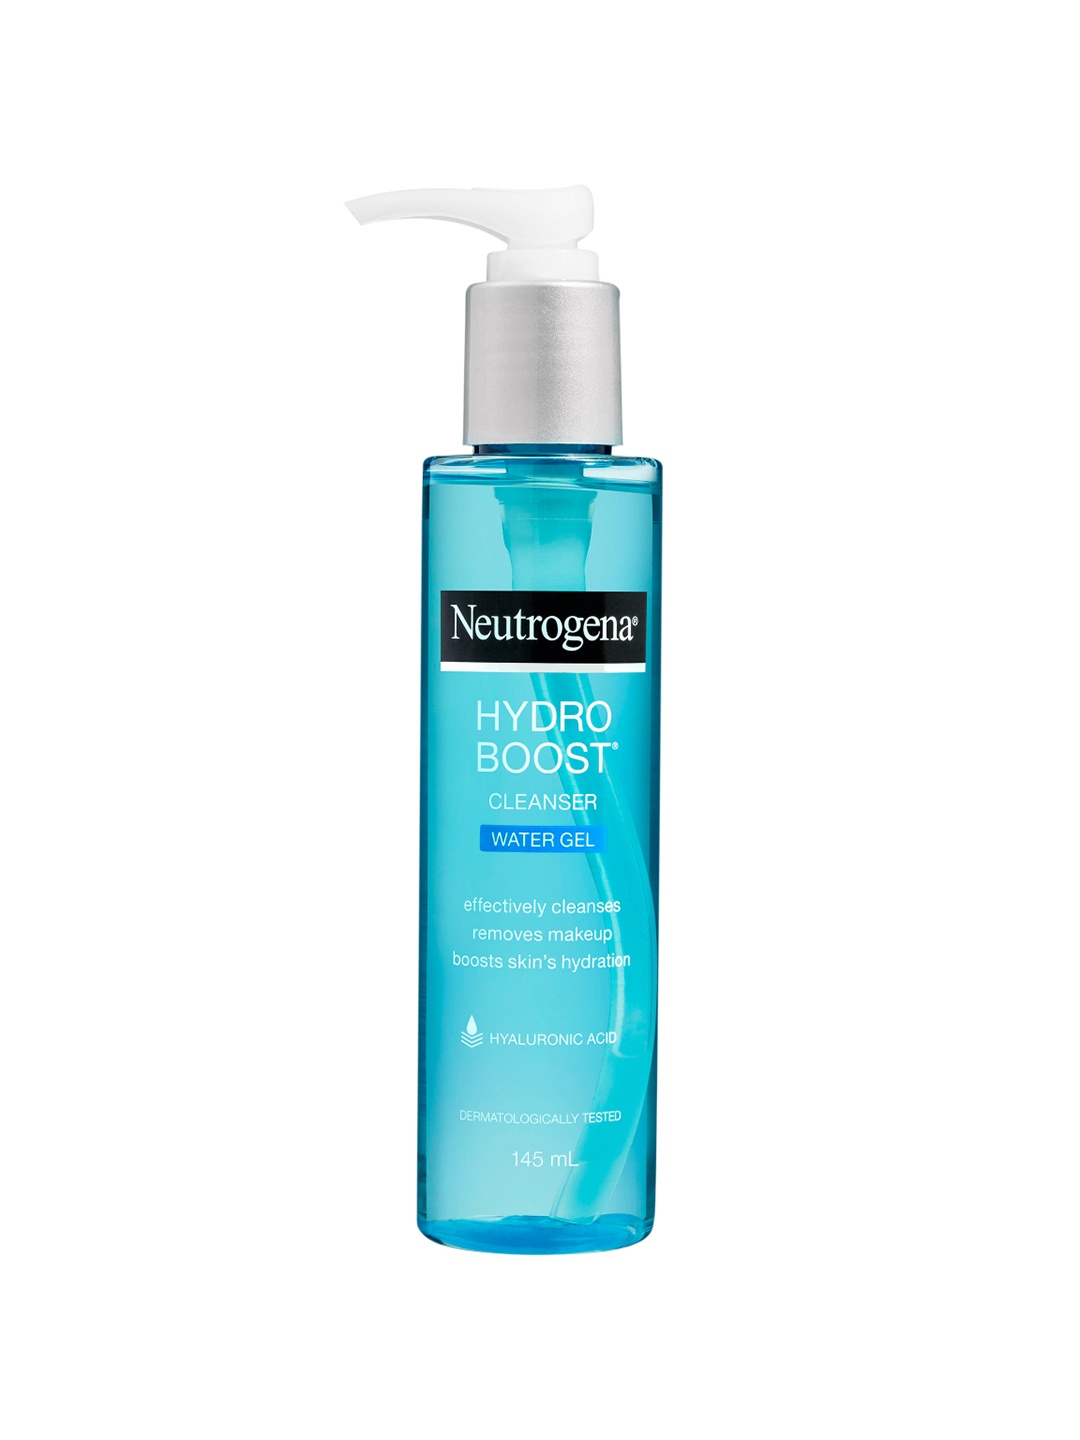 Amazon - Neutrogena Hydro Boost Cleanser Water Gel with Hyaluronic Acid – 145 ml Price